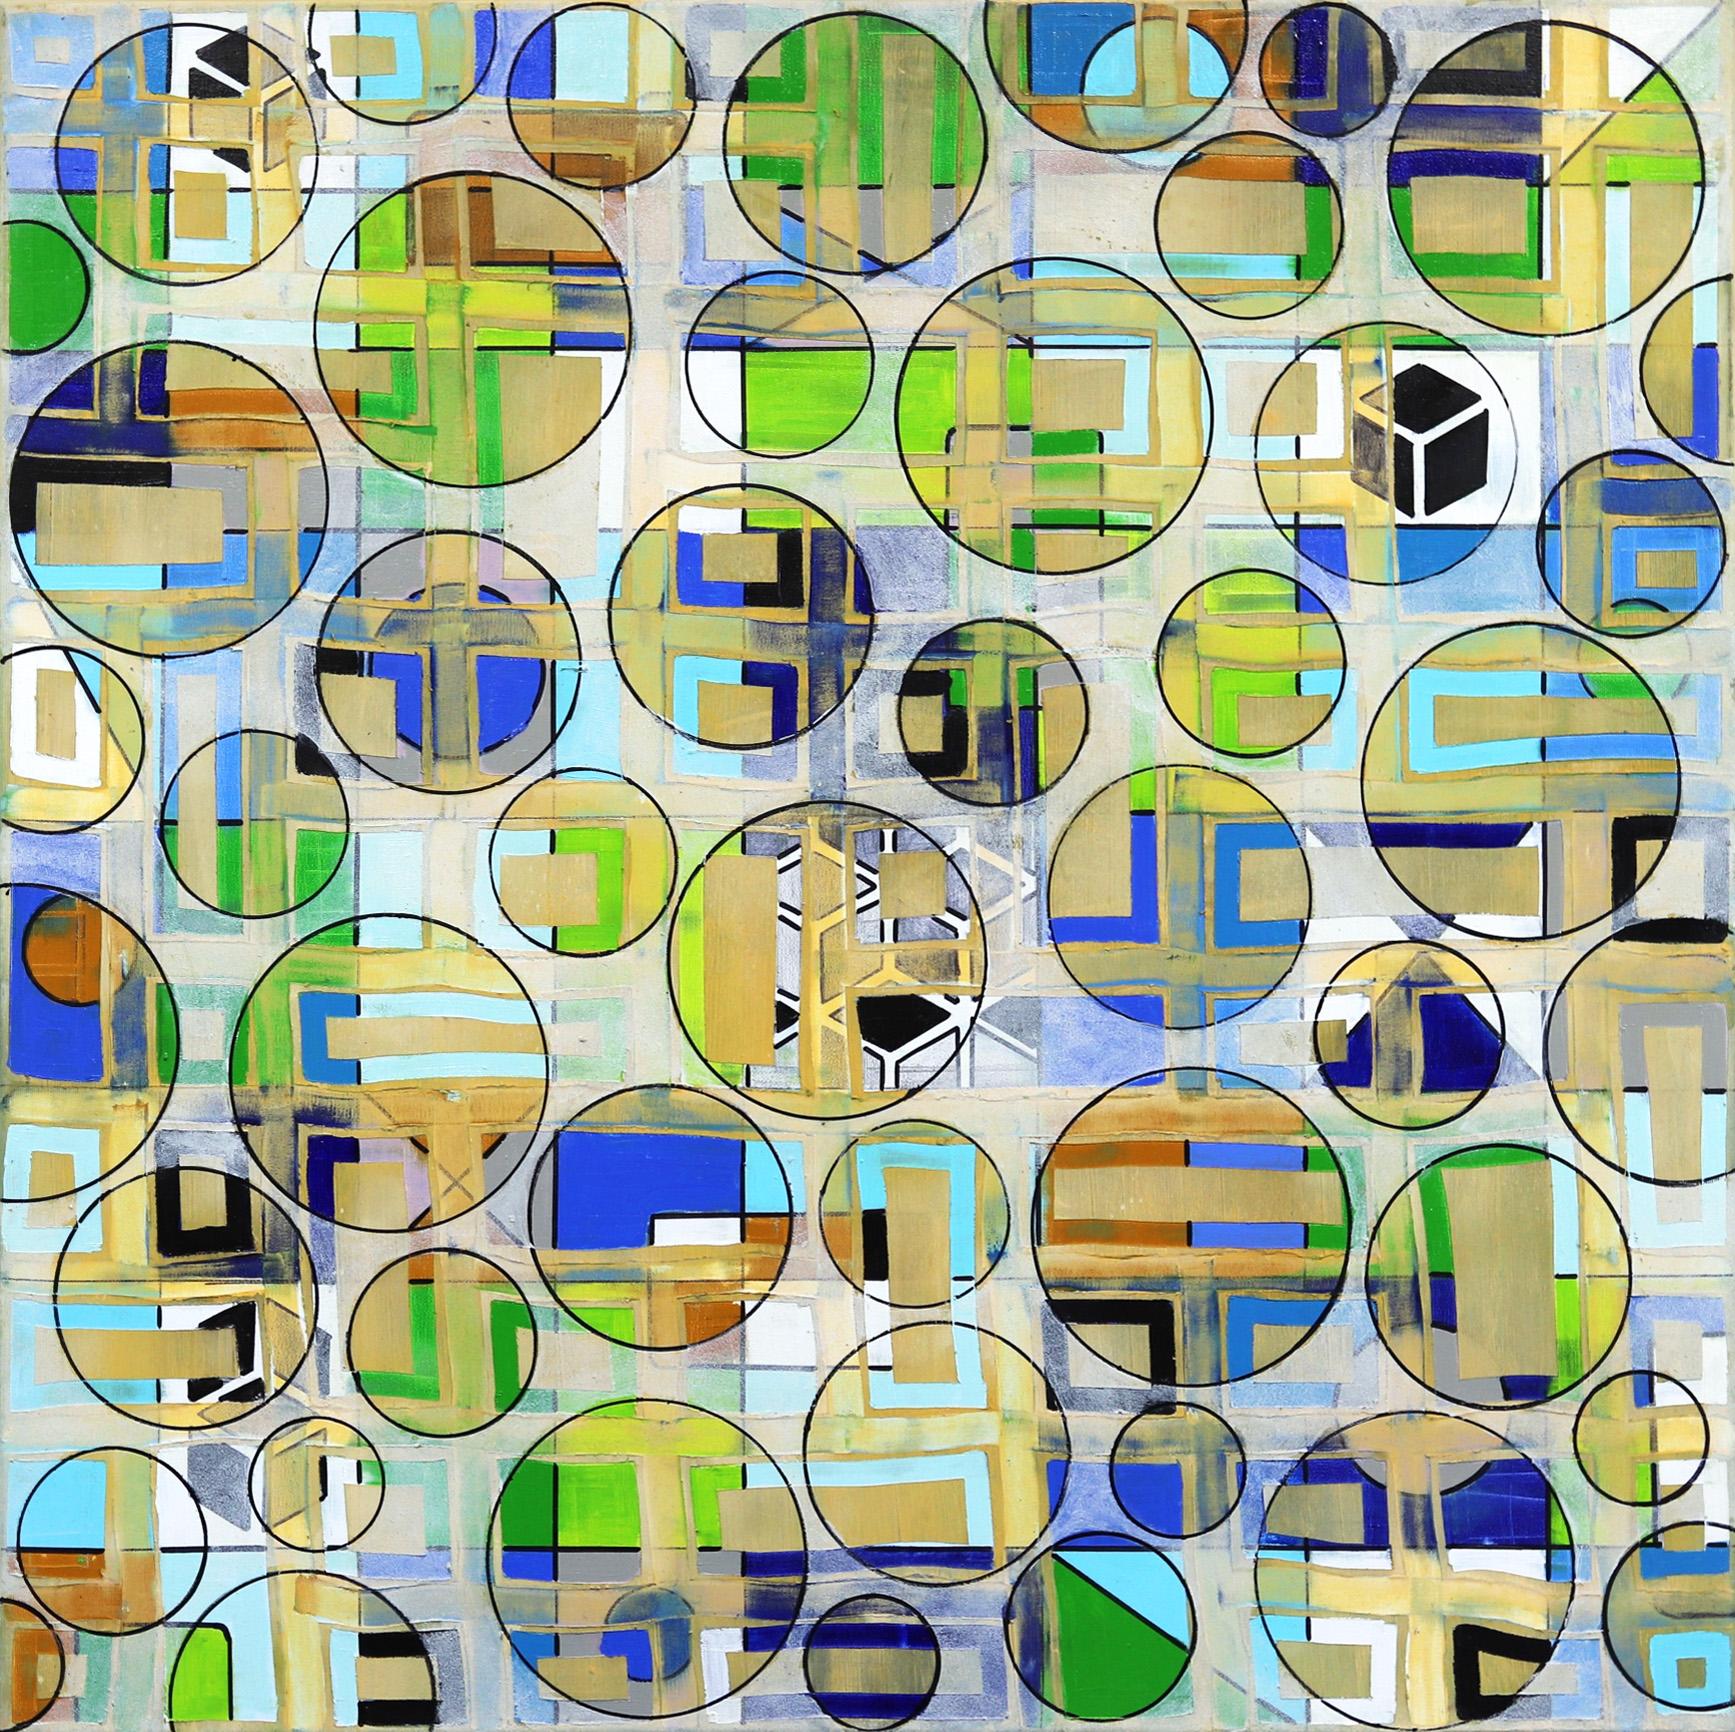 Pattern Green 21 - 1 - Green Oil Painting Geometrical Pattern with Texture - Beige Abstract Painting by Petra Rös-Nickel